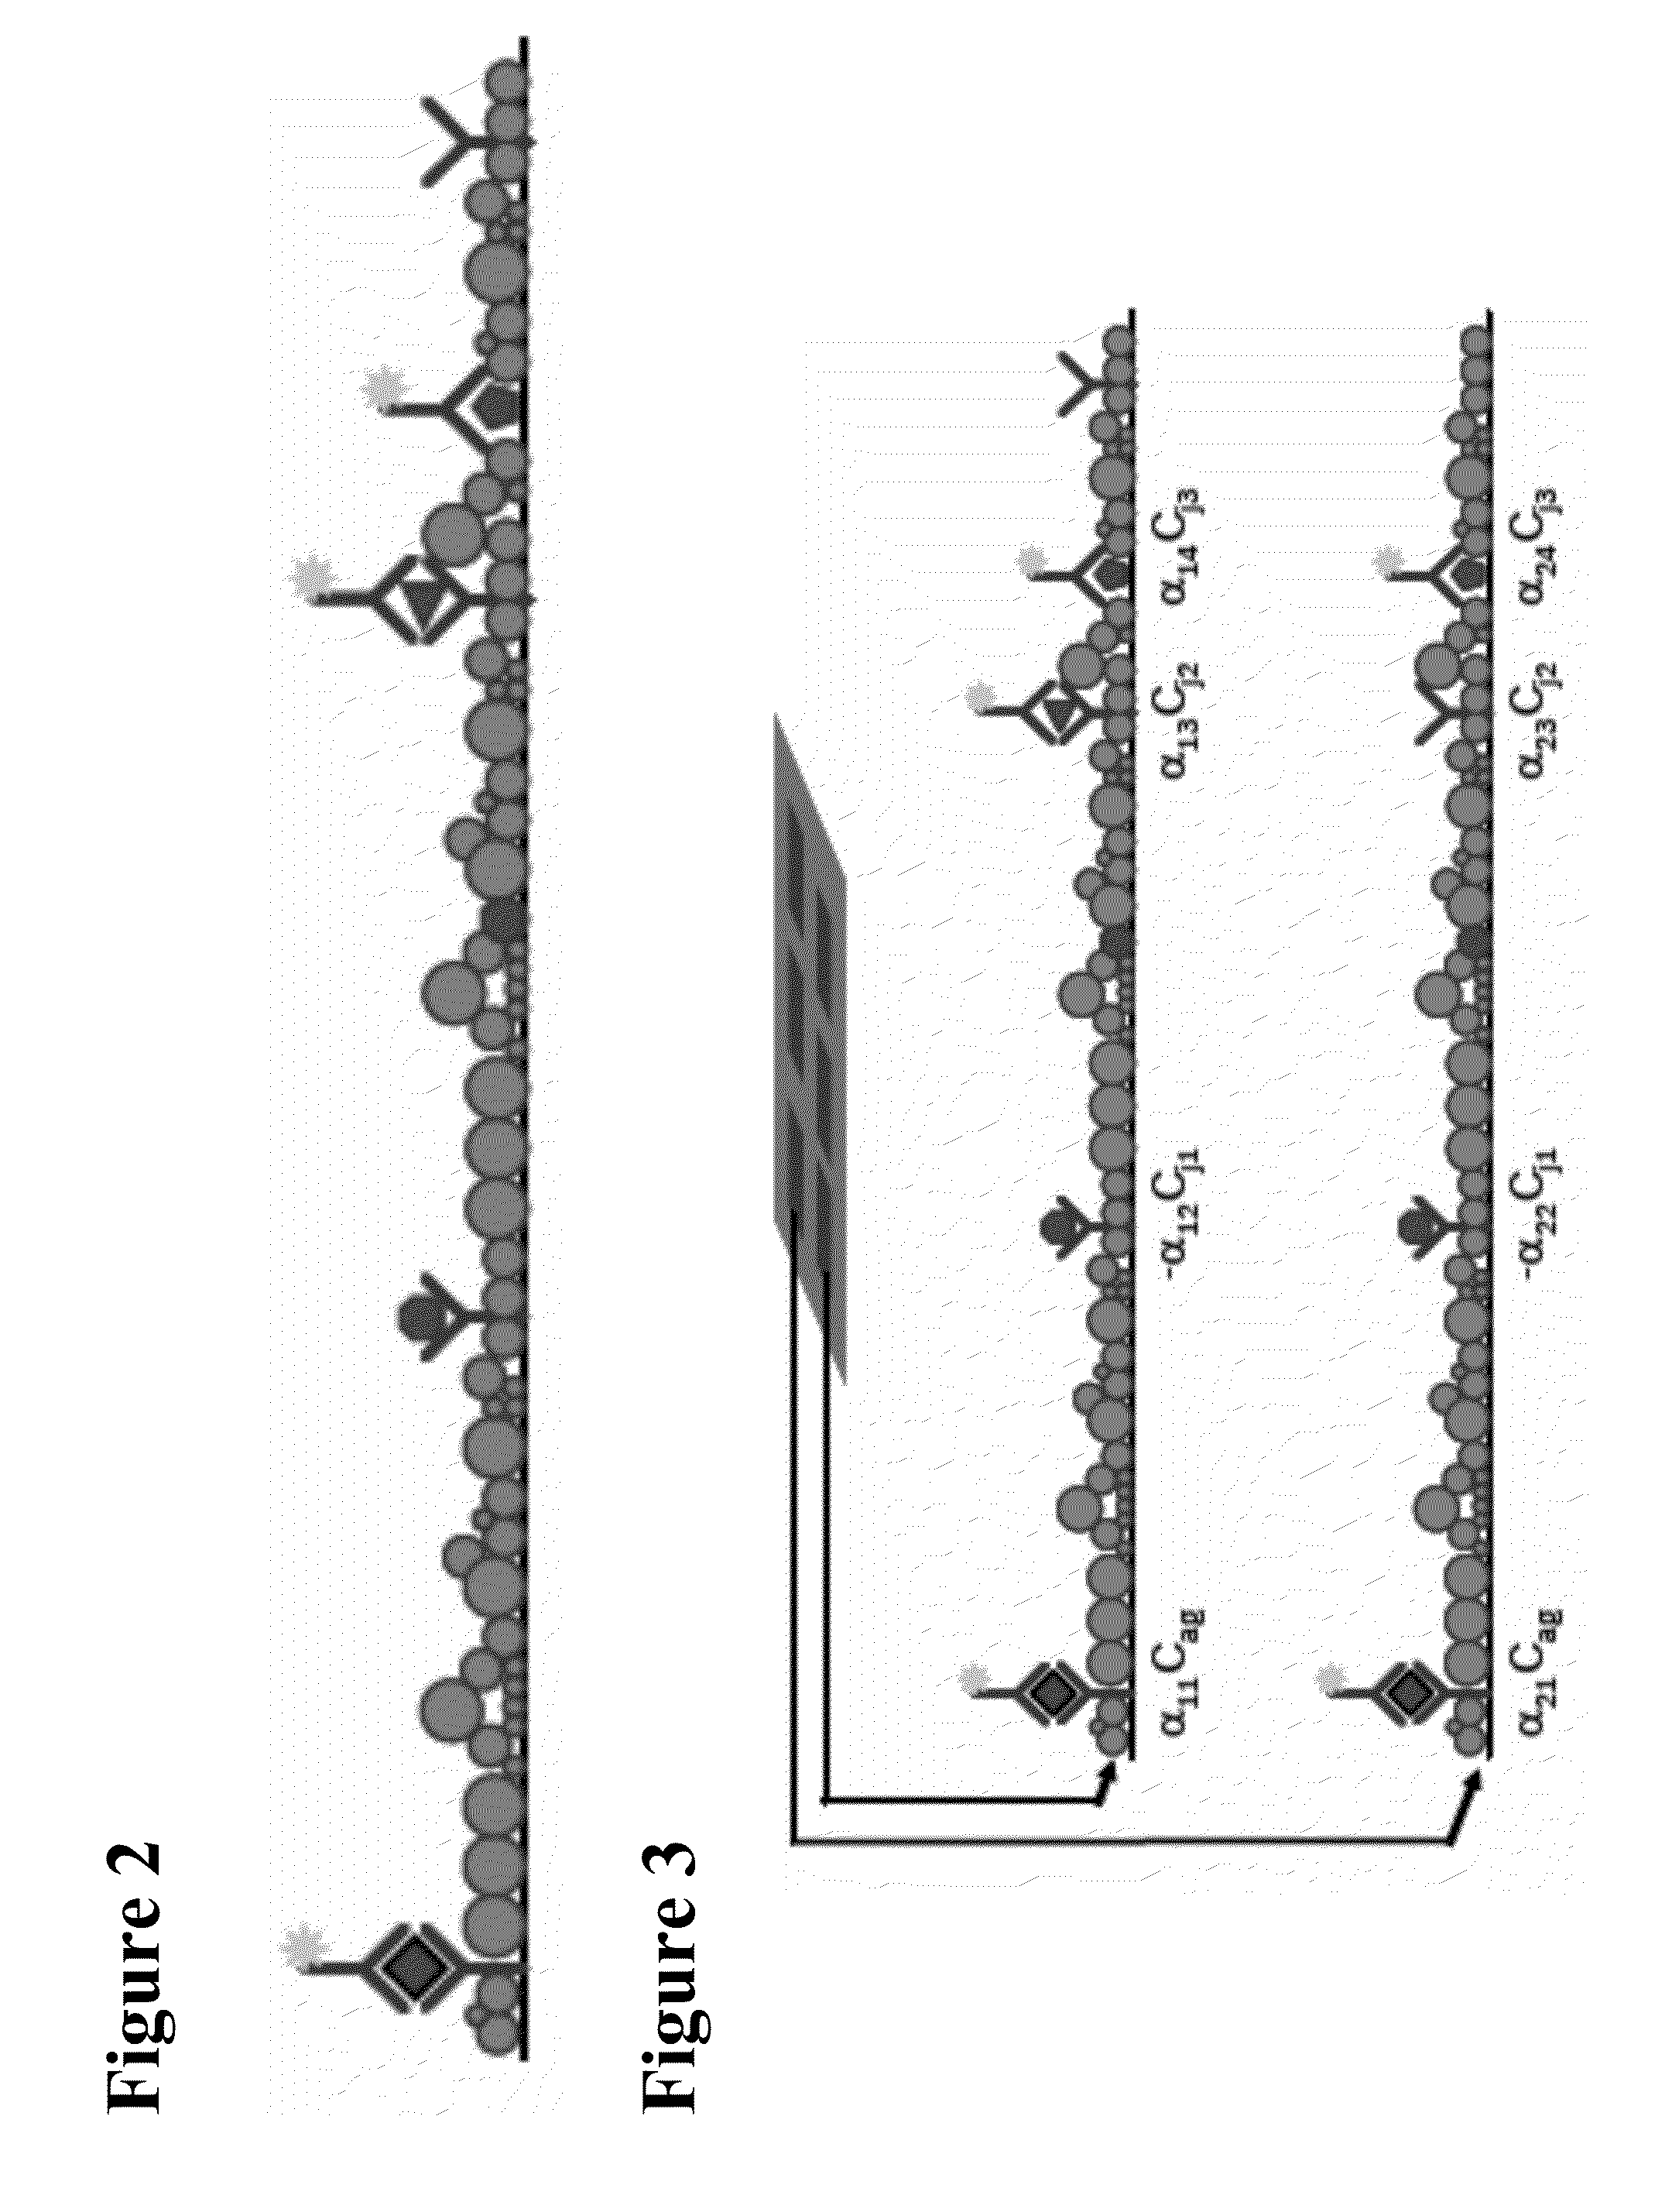 METHODS FOR GENERATING pH/IONIC CONCENTRATION GRADIENT NEAR ELECTRODE SURFACES FOR MODULATING BIOMOLECULAR INTERACTIONS, AND BUBBLE DETECTION USING ELECTRODES